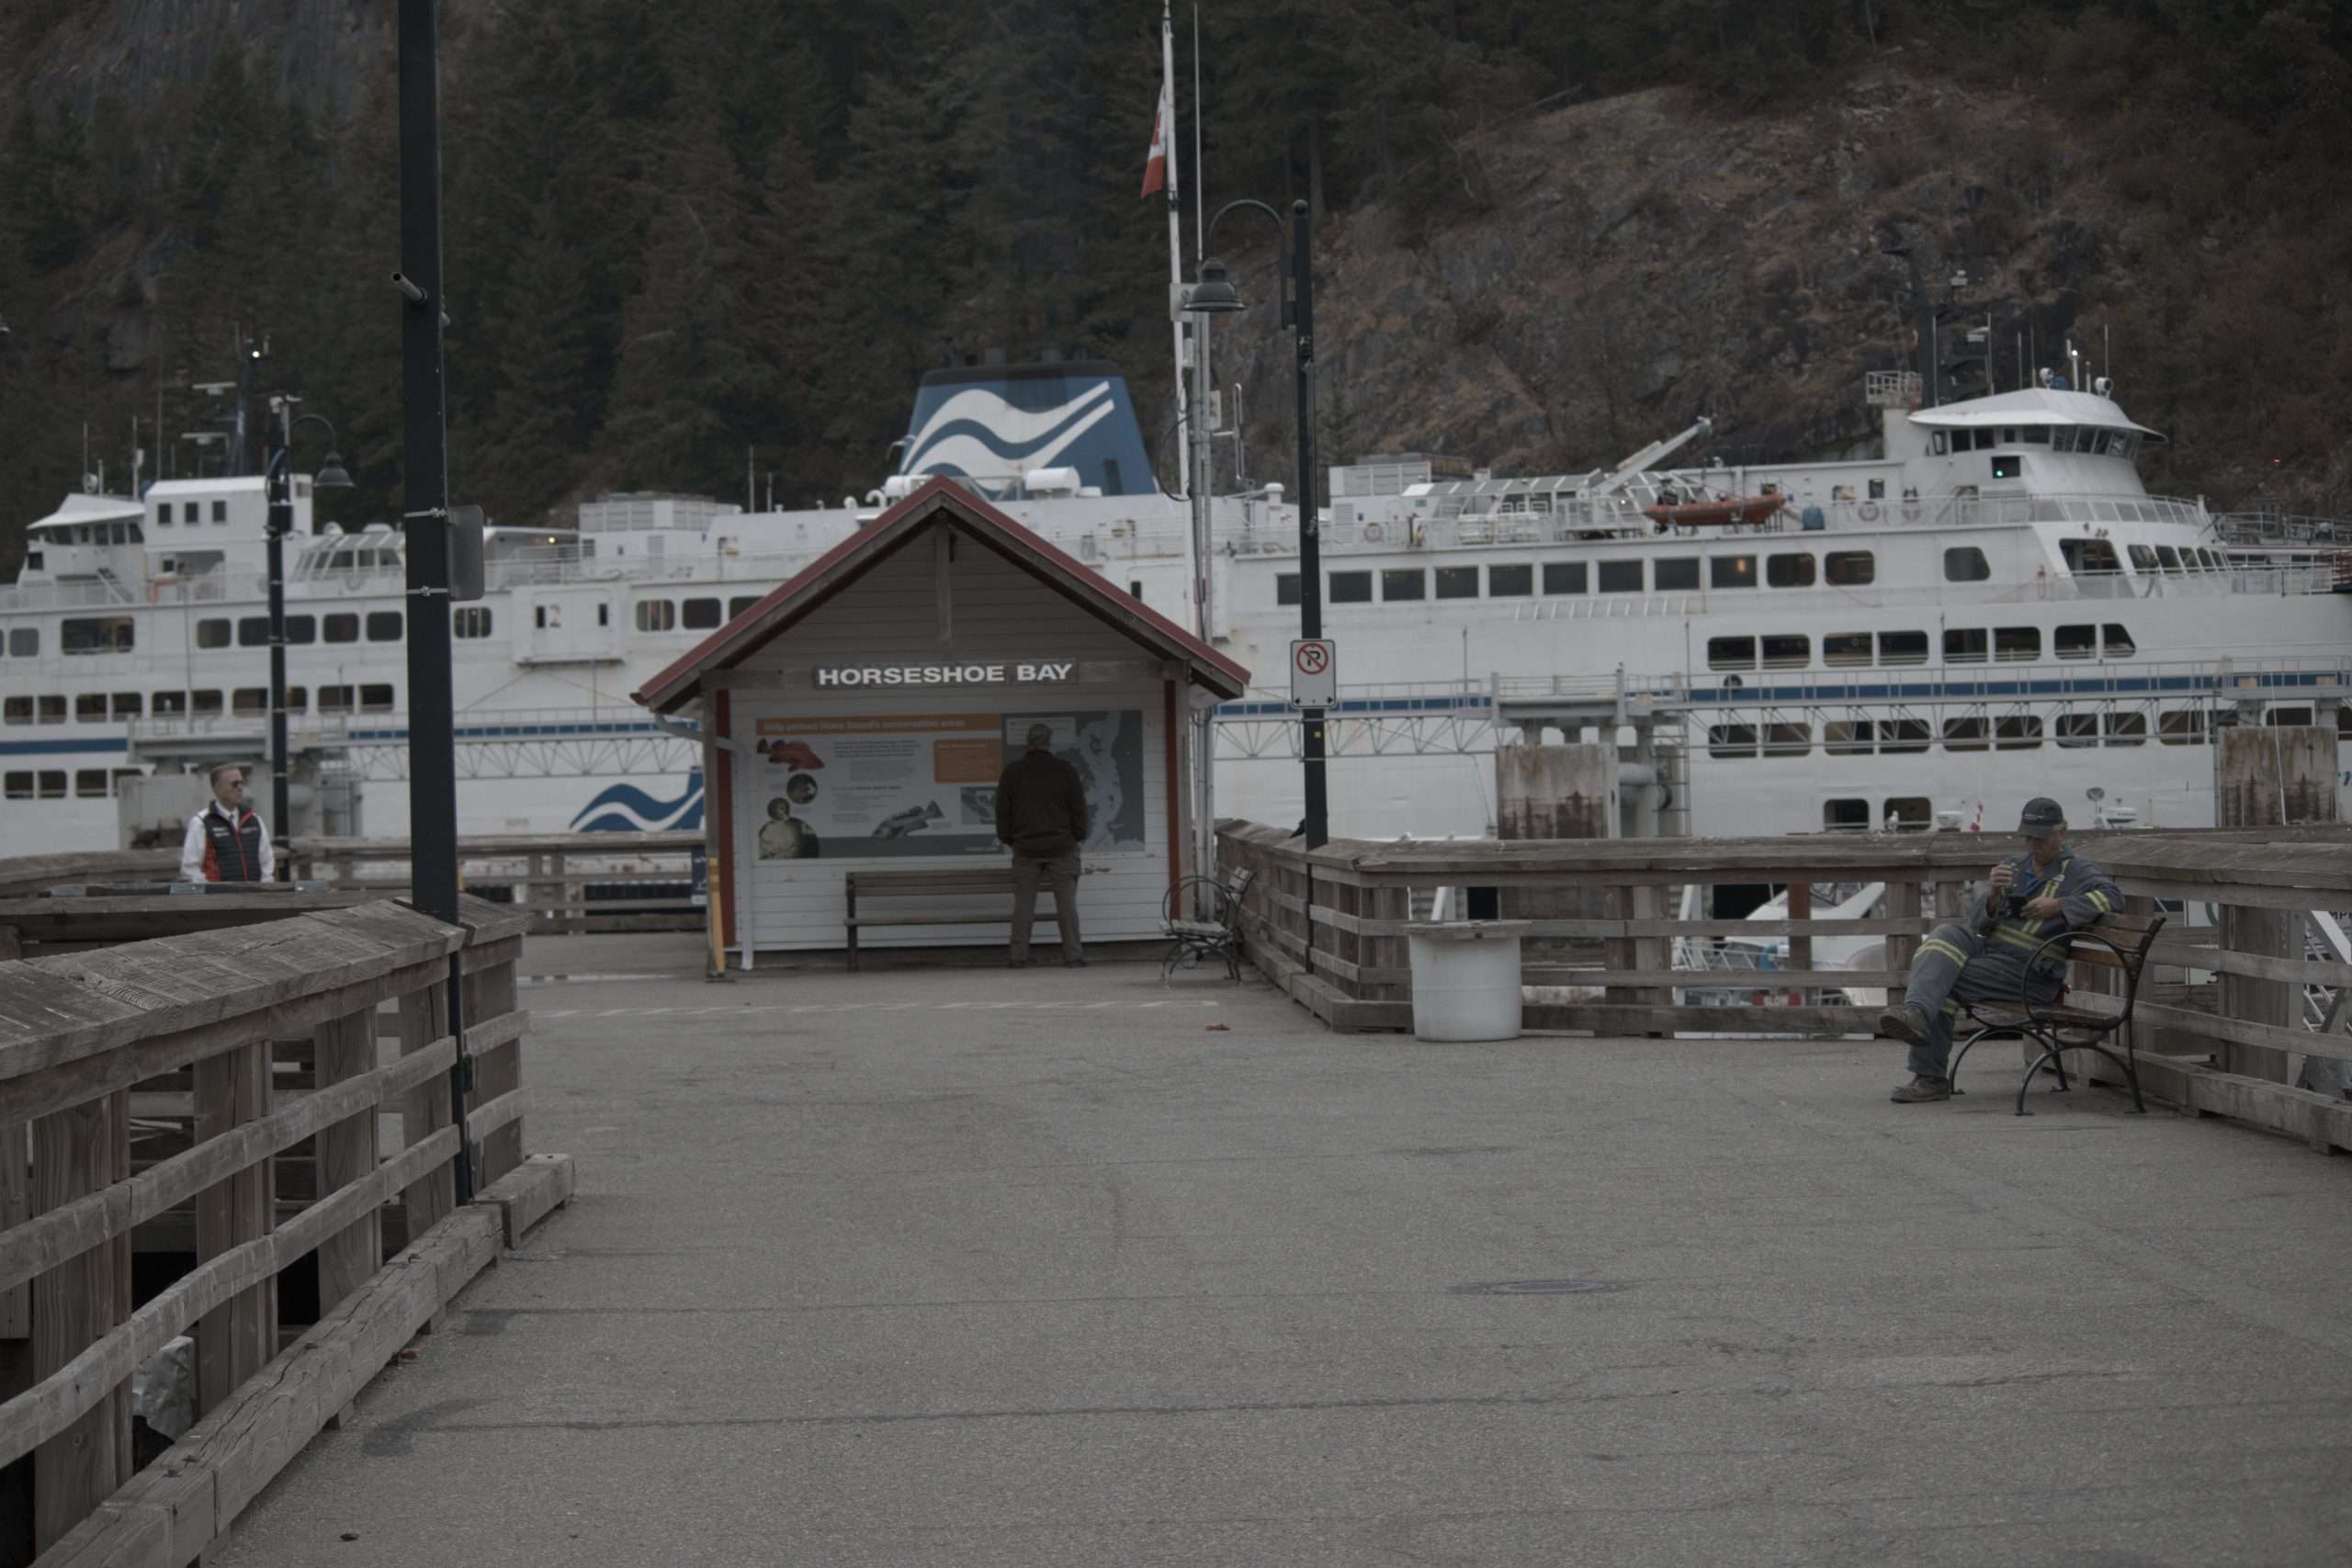 Horseshoe Bay Terminal with the ferry to Gibsons in the background